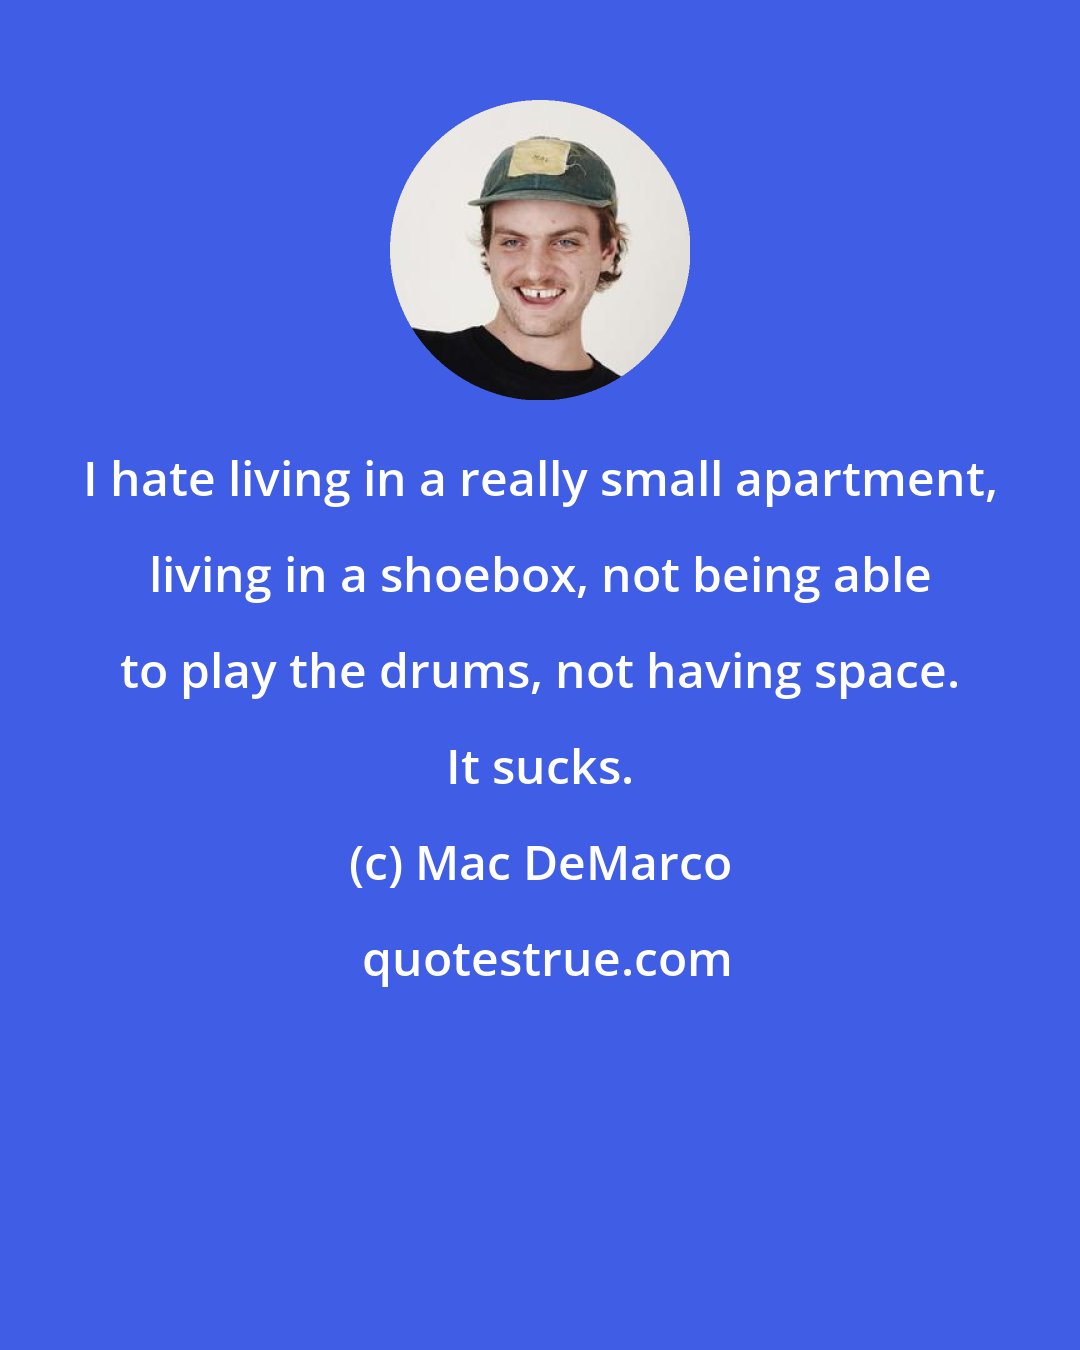 Mac DeMarco: I hate living in a really small apartment, living in a shoebox, not being able to play the drums, not having space. It sucks.